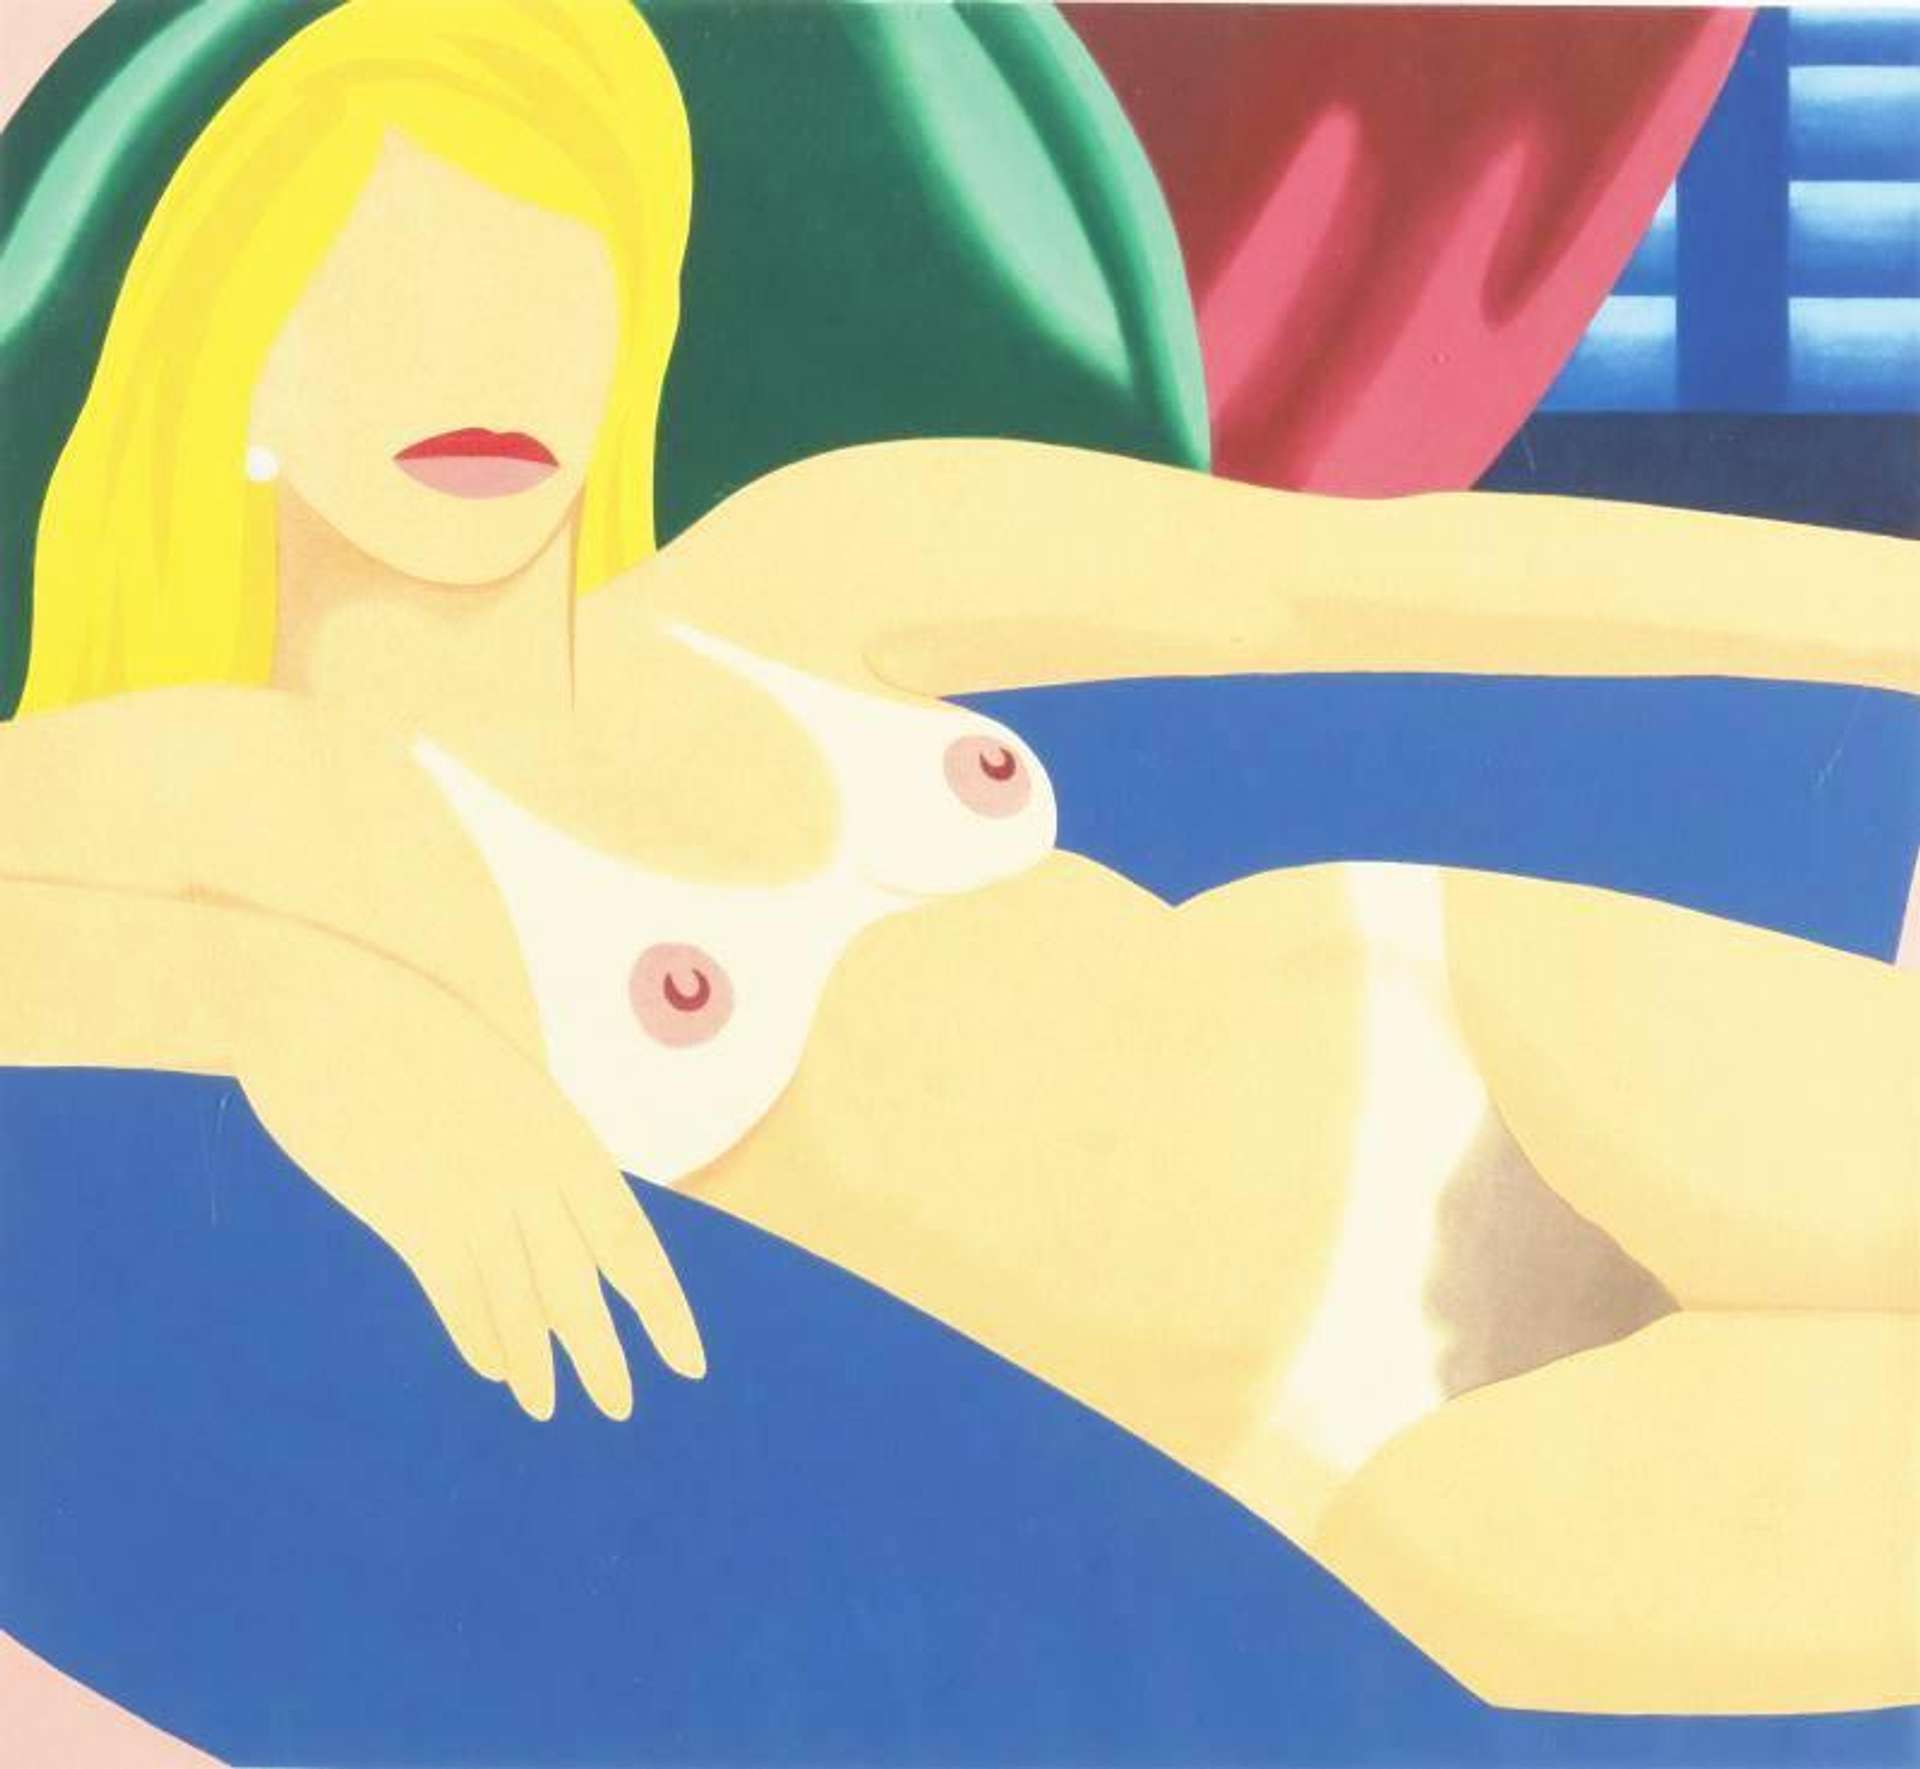 Tom Wesselmann: The Pop Artist Who Redefined the Female Form